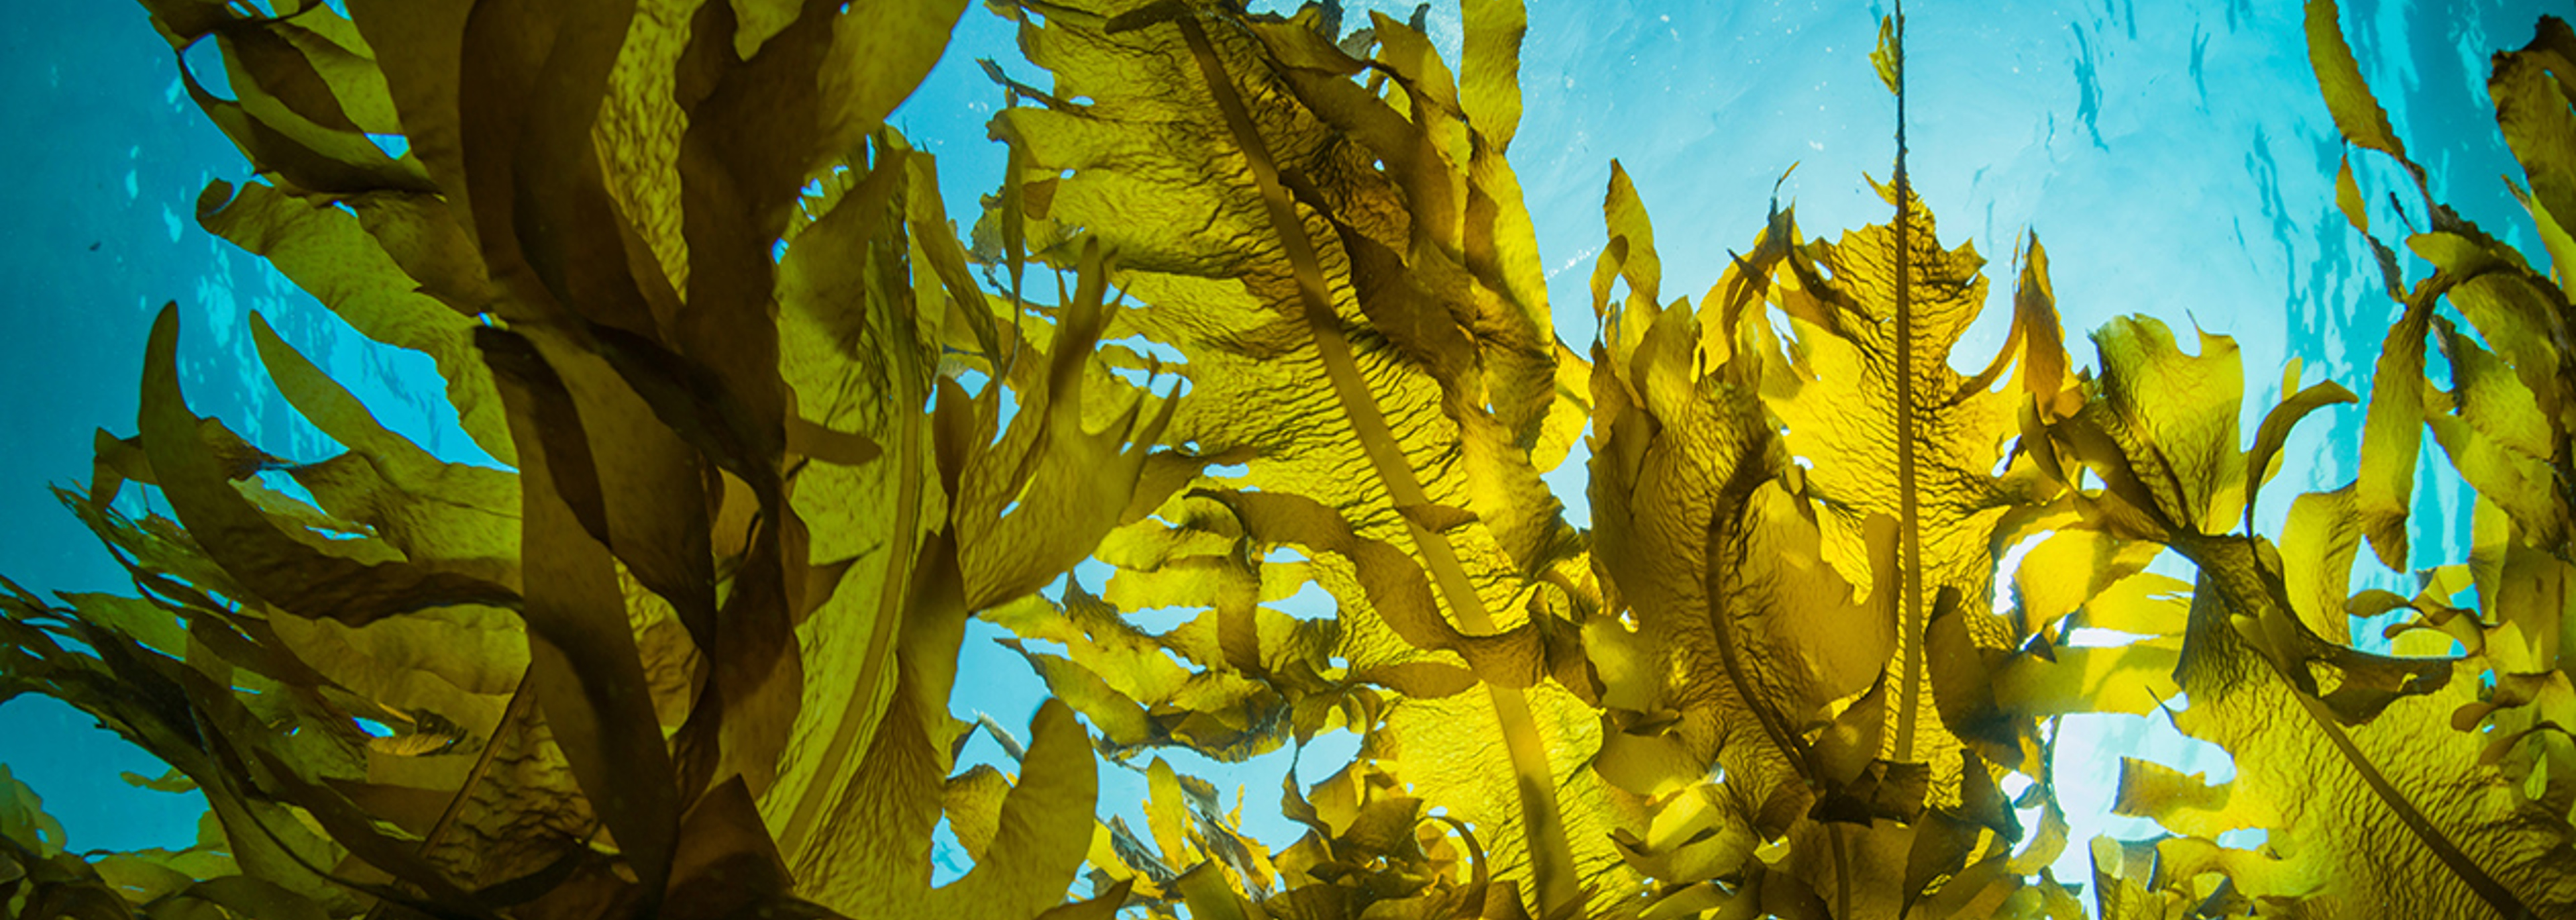 Seaweed’s vital role in fighting climate change